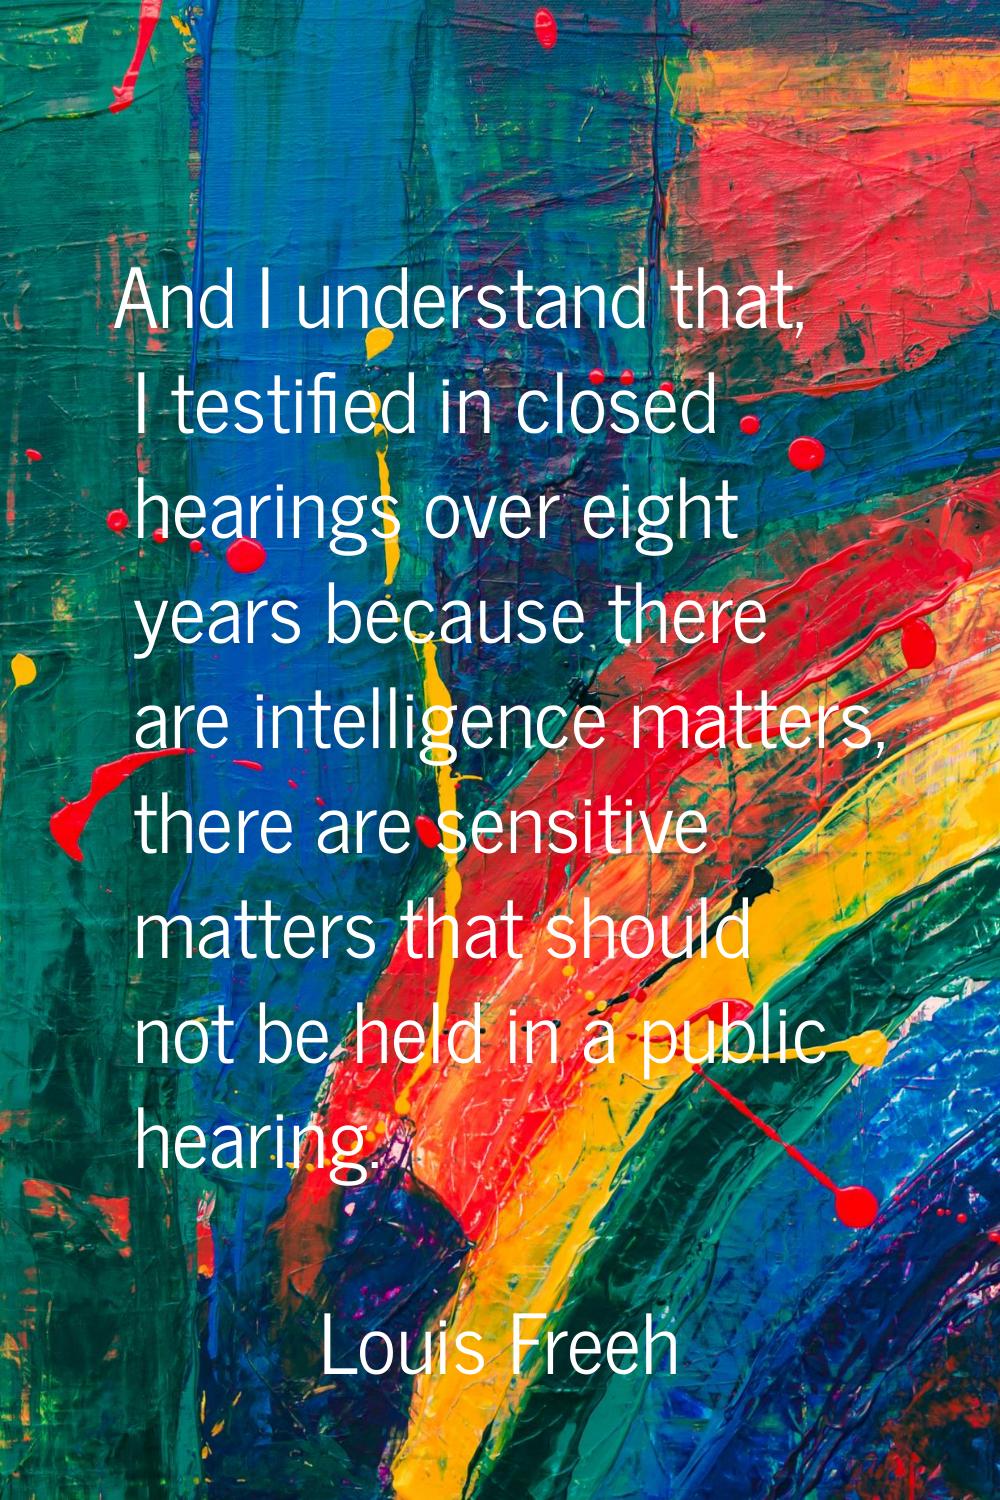 And I understand that, I testified in closed hearings over eight years because there are intelligen